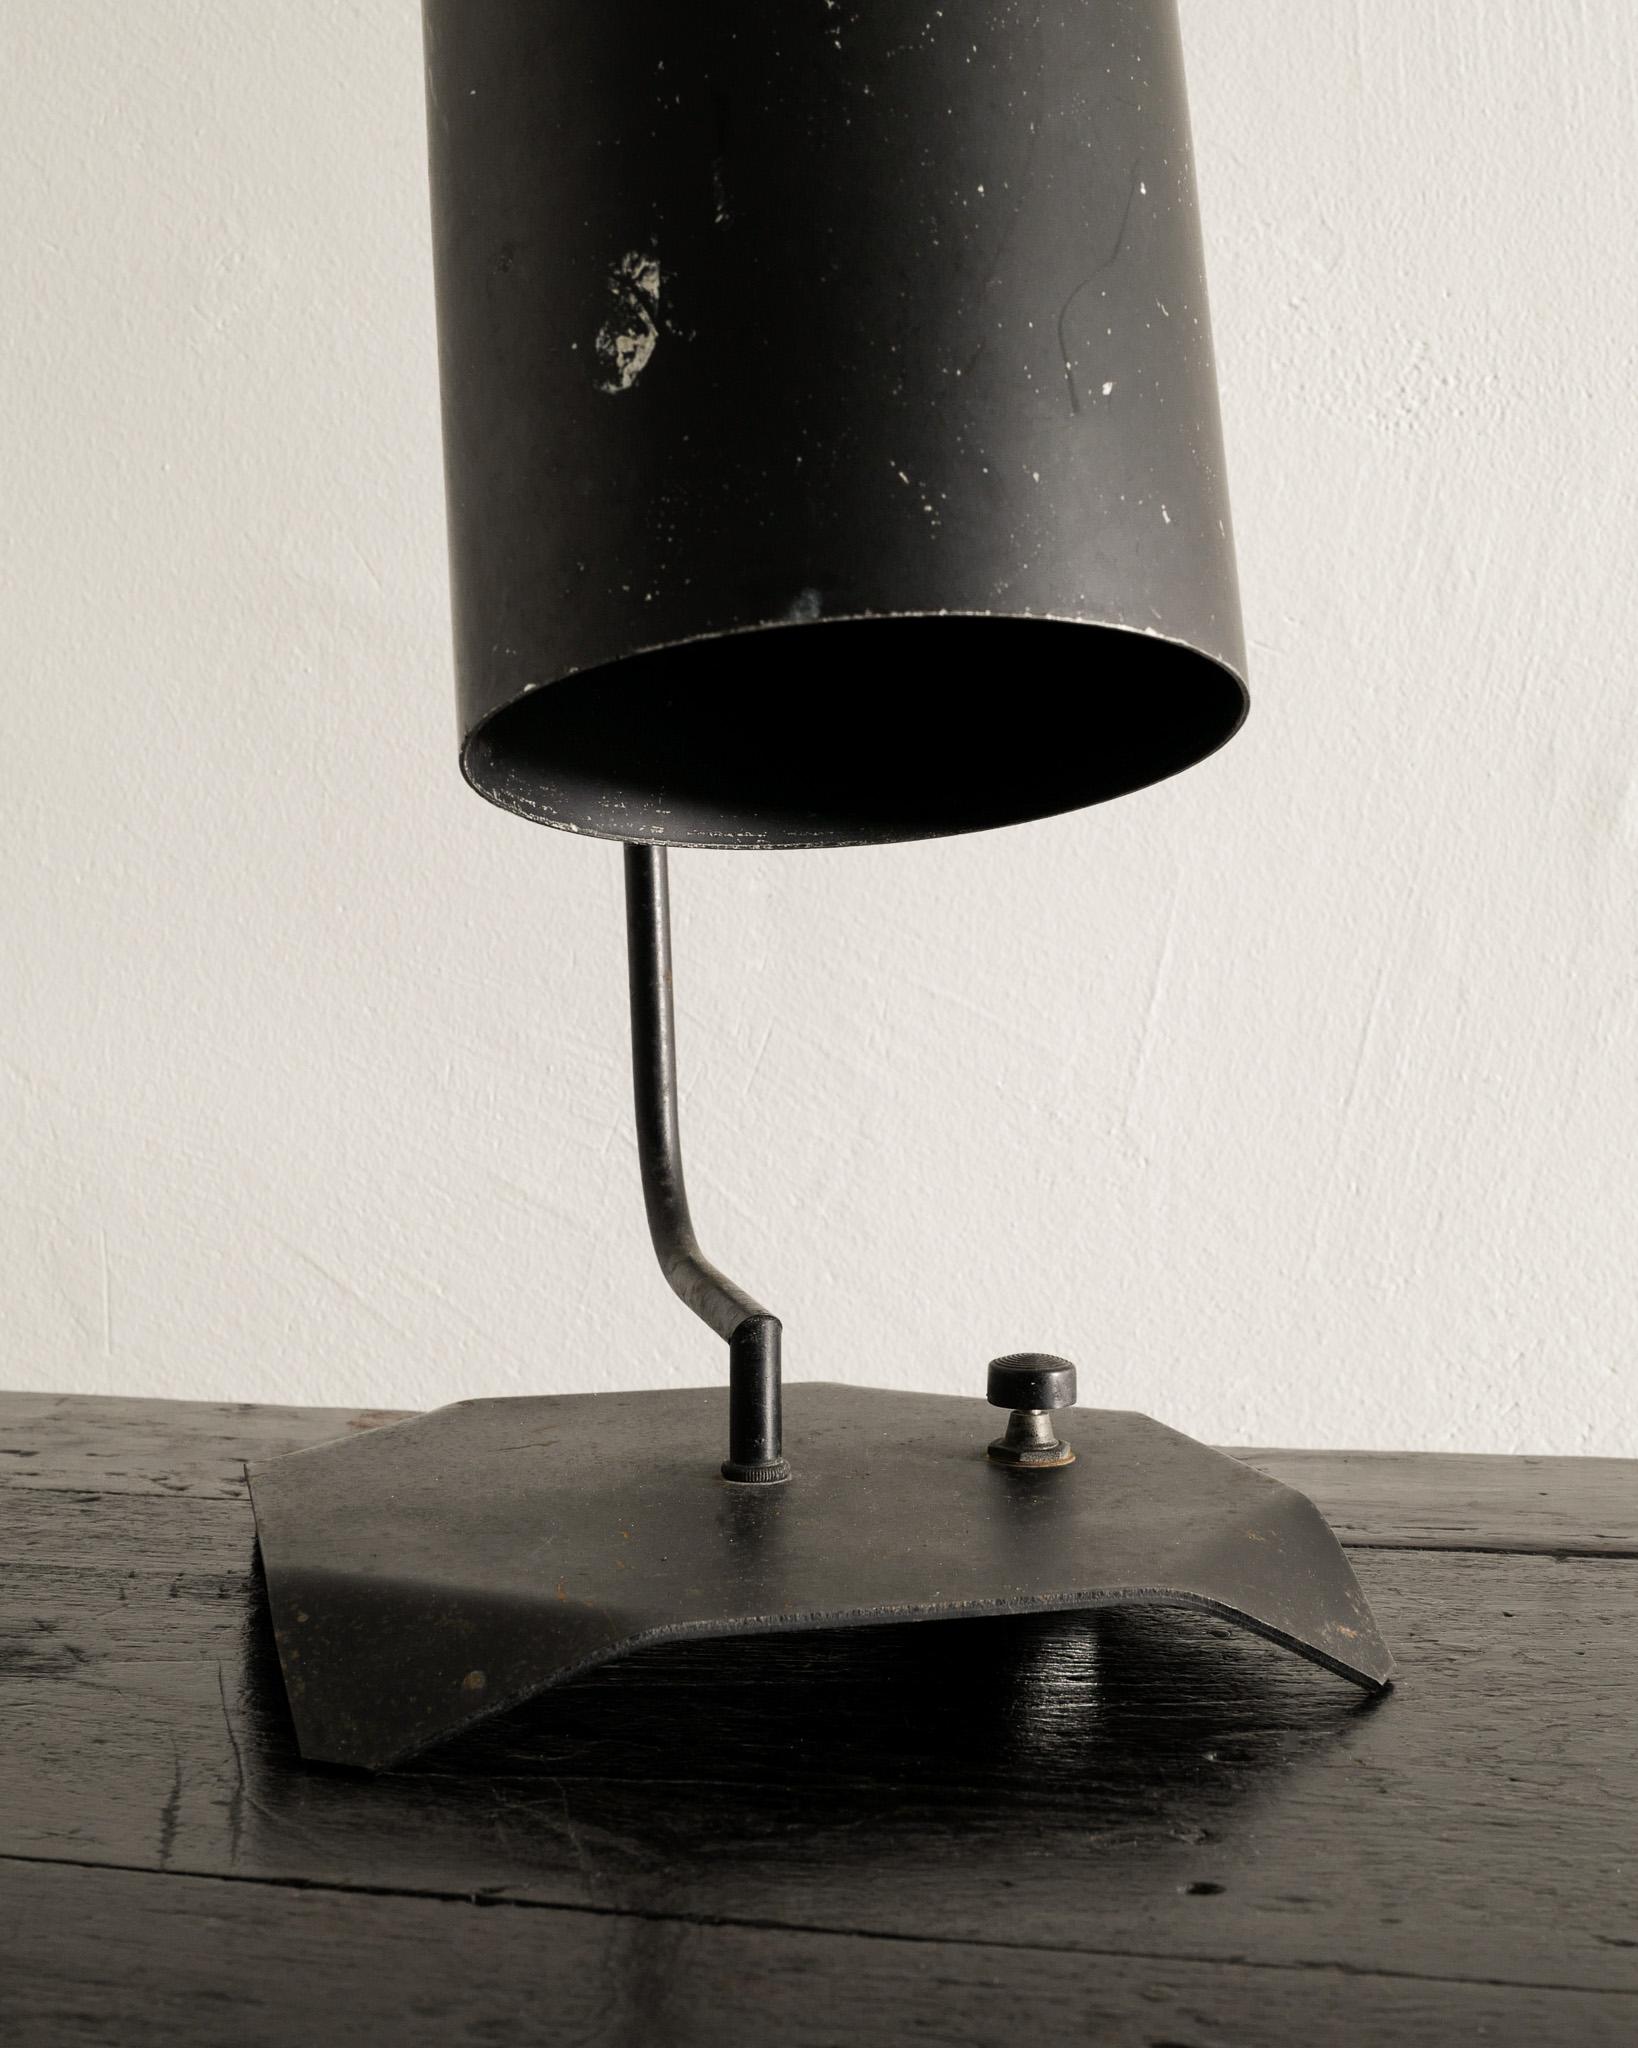 Metal French Mid Century Black Desk Table Lamp by Serge Mouille & Isamu Noguchi, 1959 For Sale